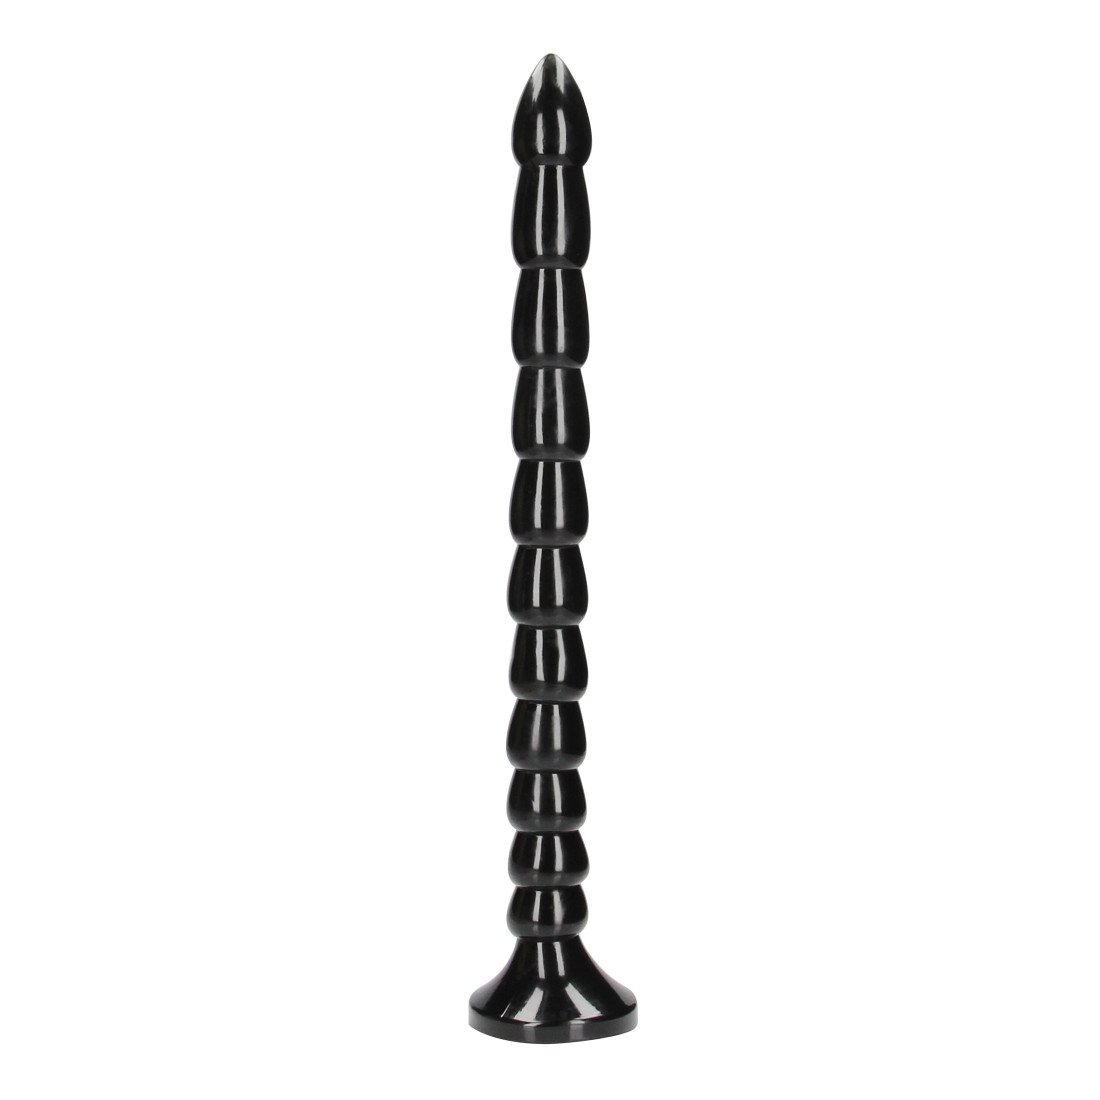 Analinis dildo „Stacked Anal Snake 16 Inch“ - Ouch!